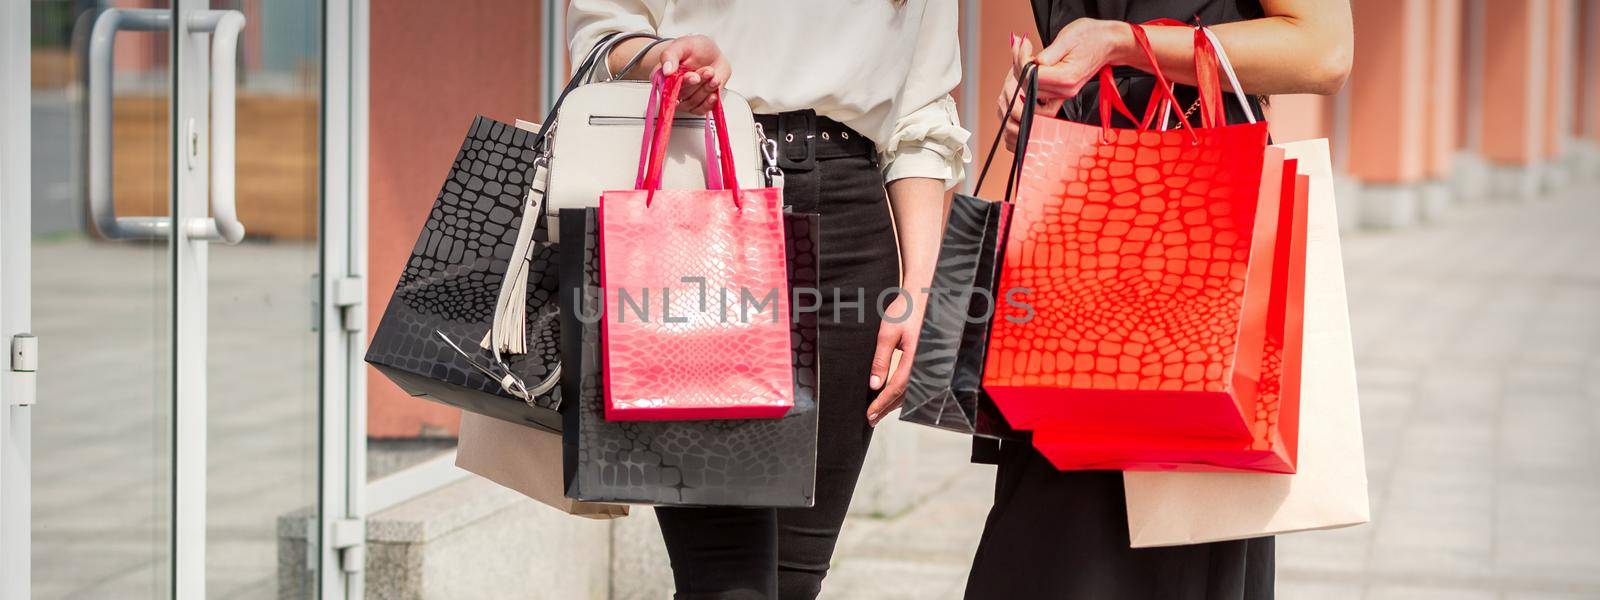 Two young women with shopping bags standing near the shopping mall outdoors